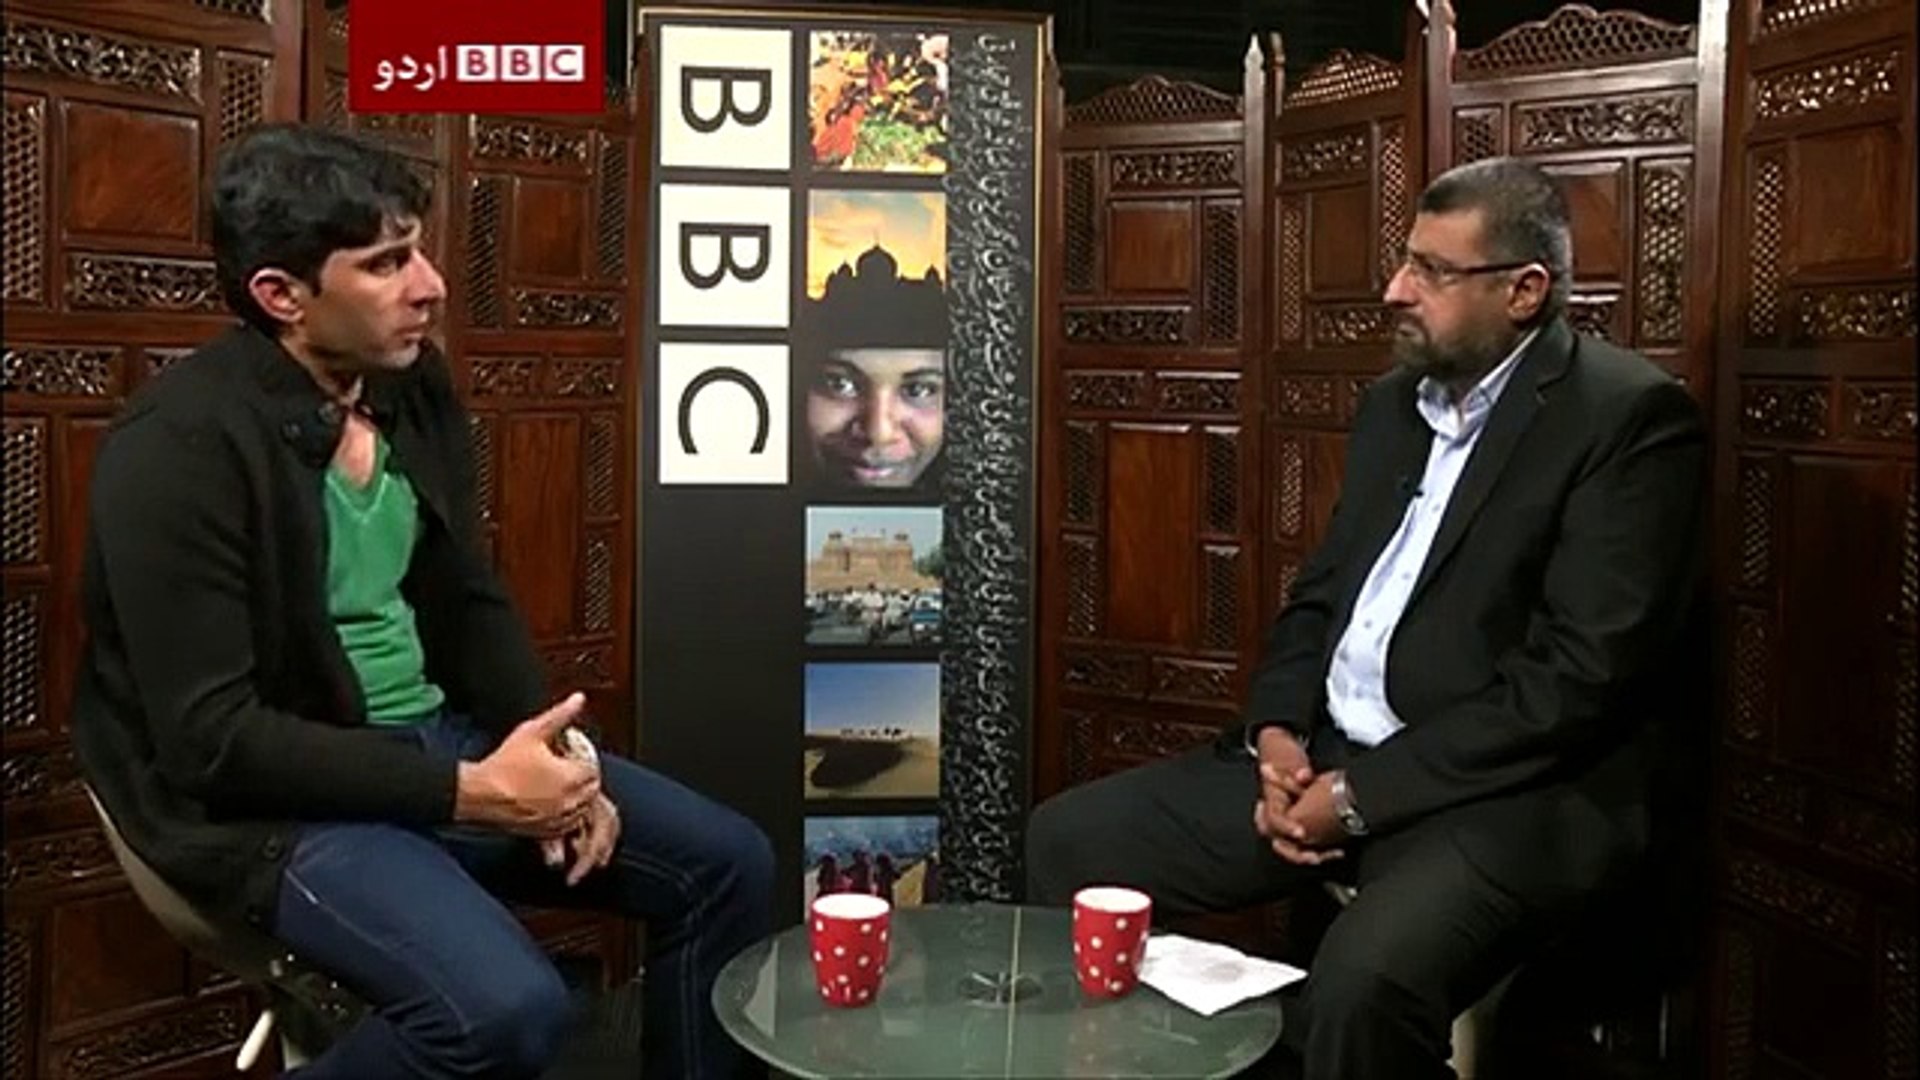 Latest interview of Misbah Ul Haq on BBC News